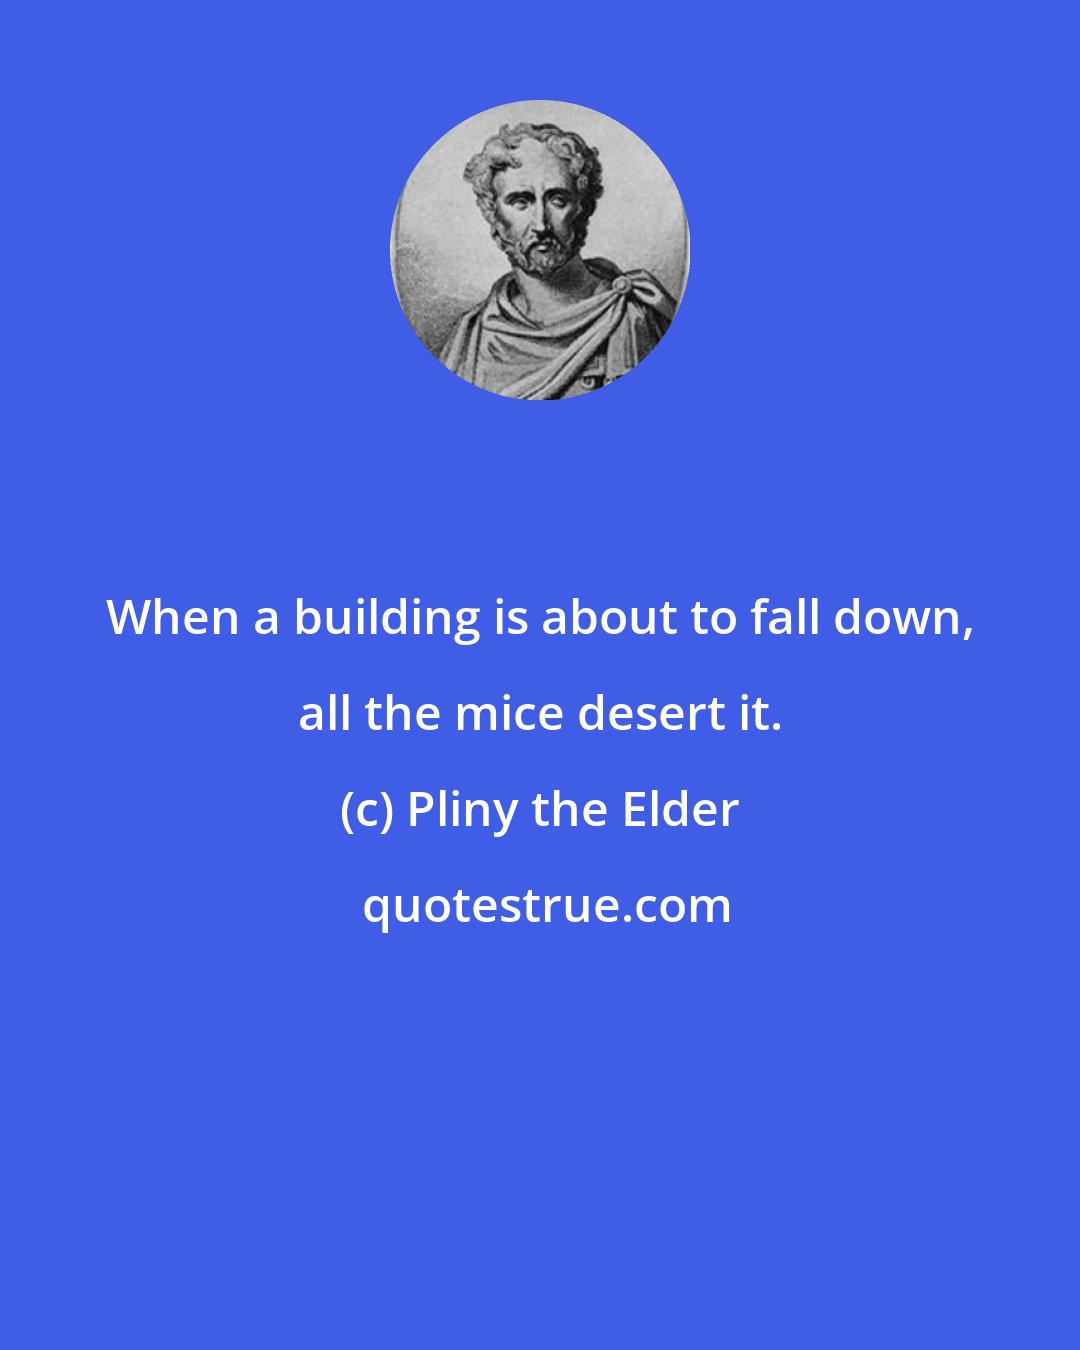 Pliny the Elder: When a building is about to fall down, all the mice desert it.